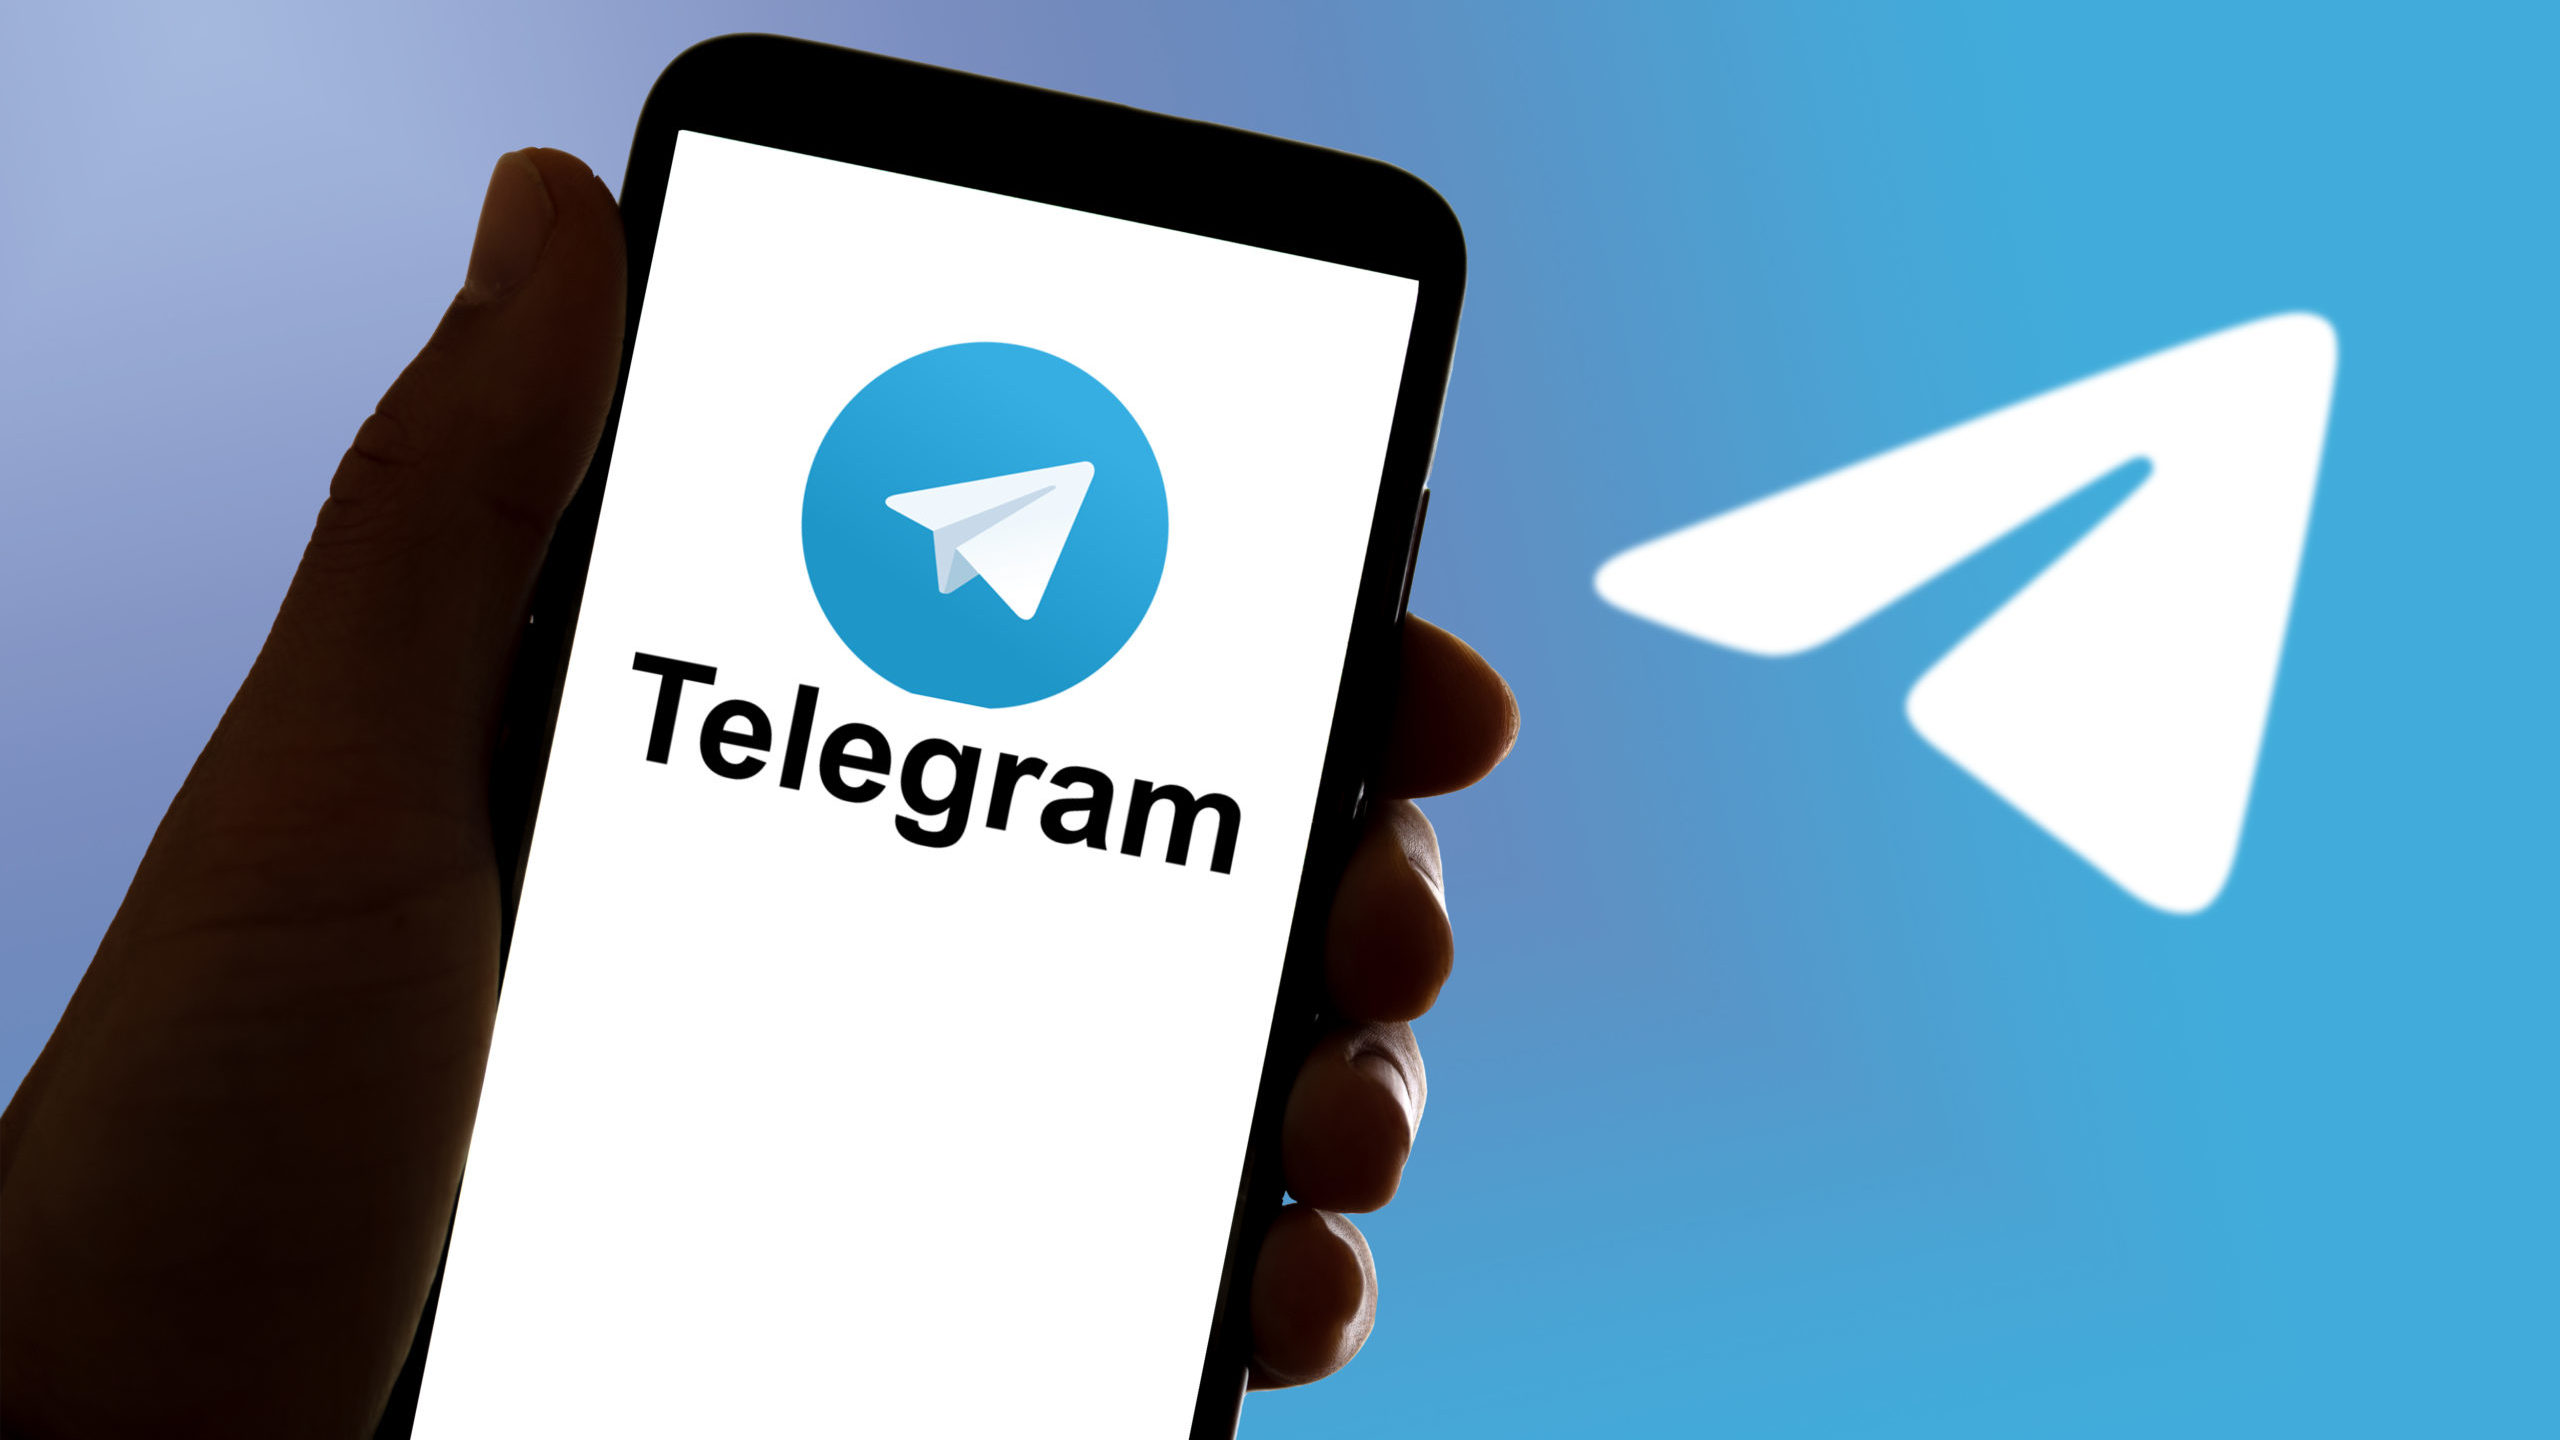 Telegram Cracks Down on Extremists, Removing Channels and Content